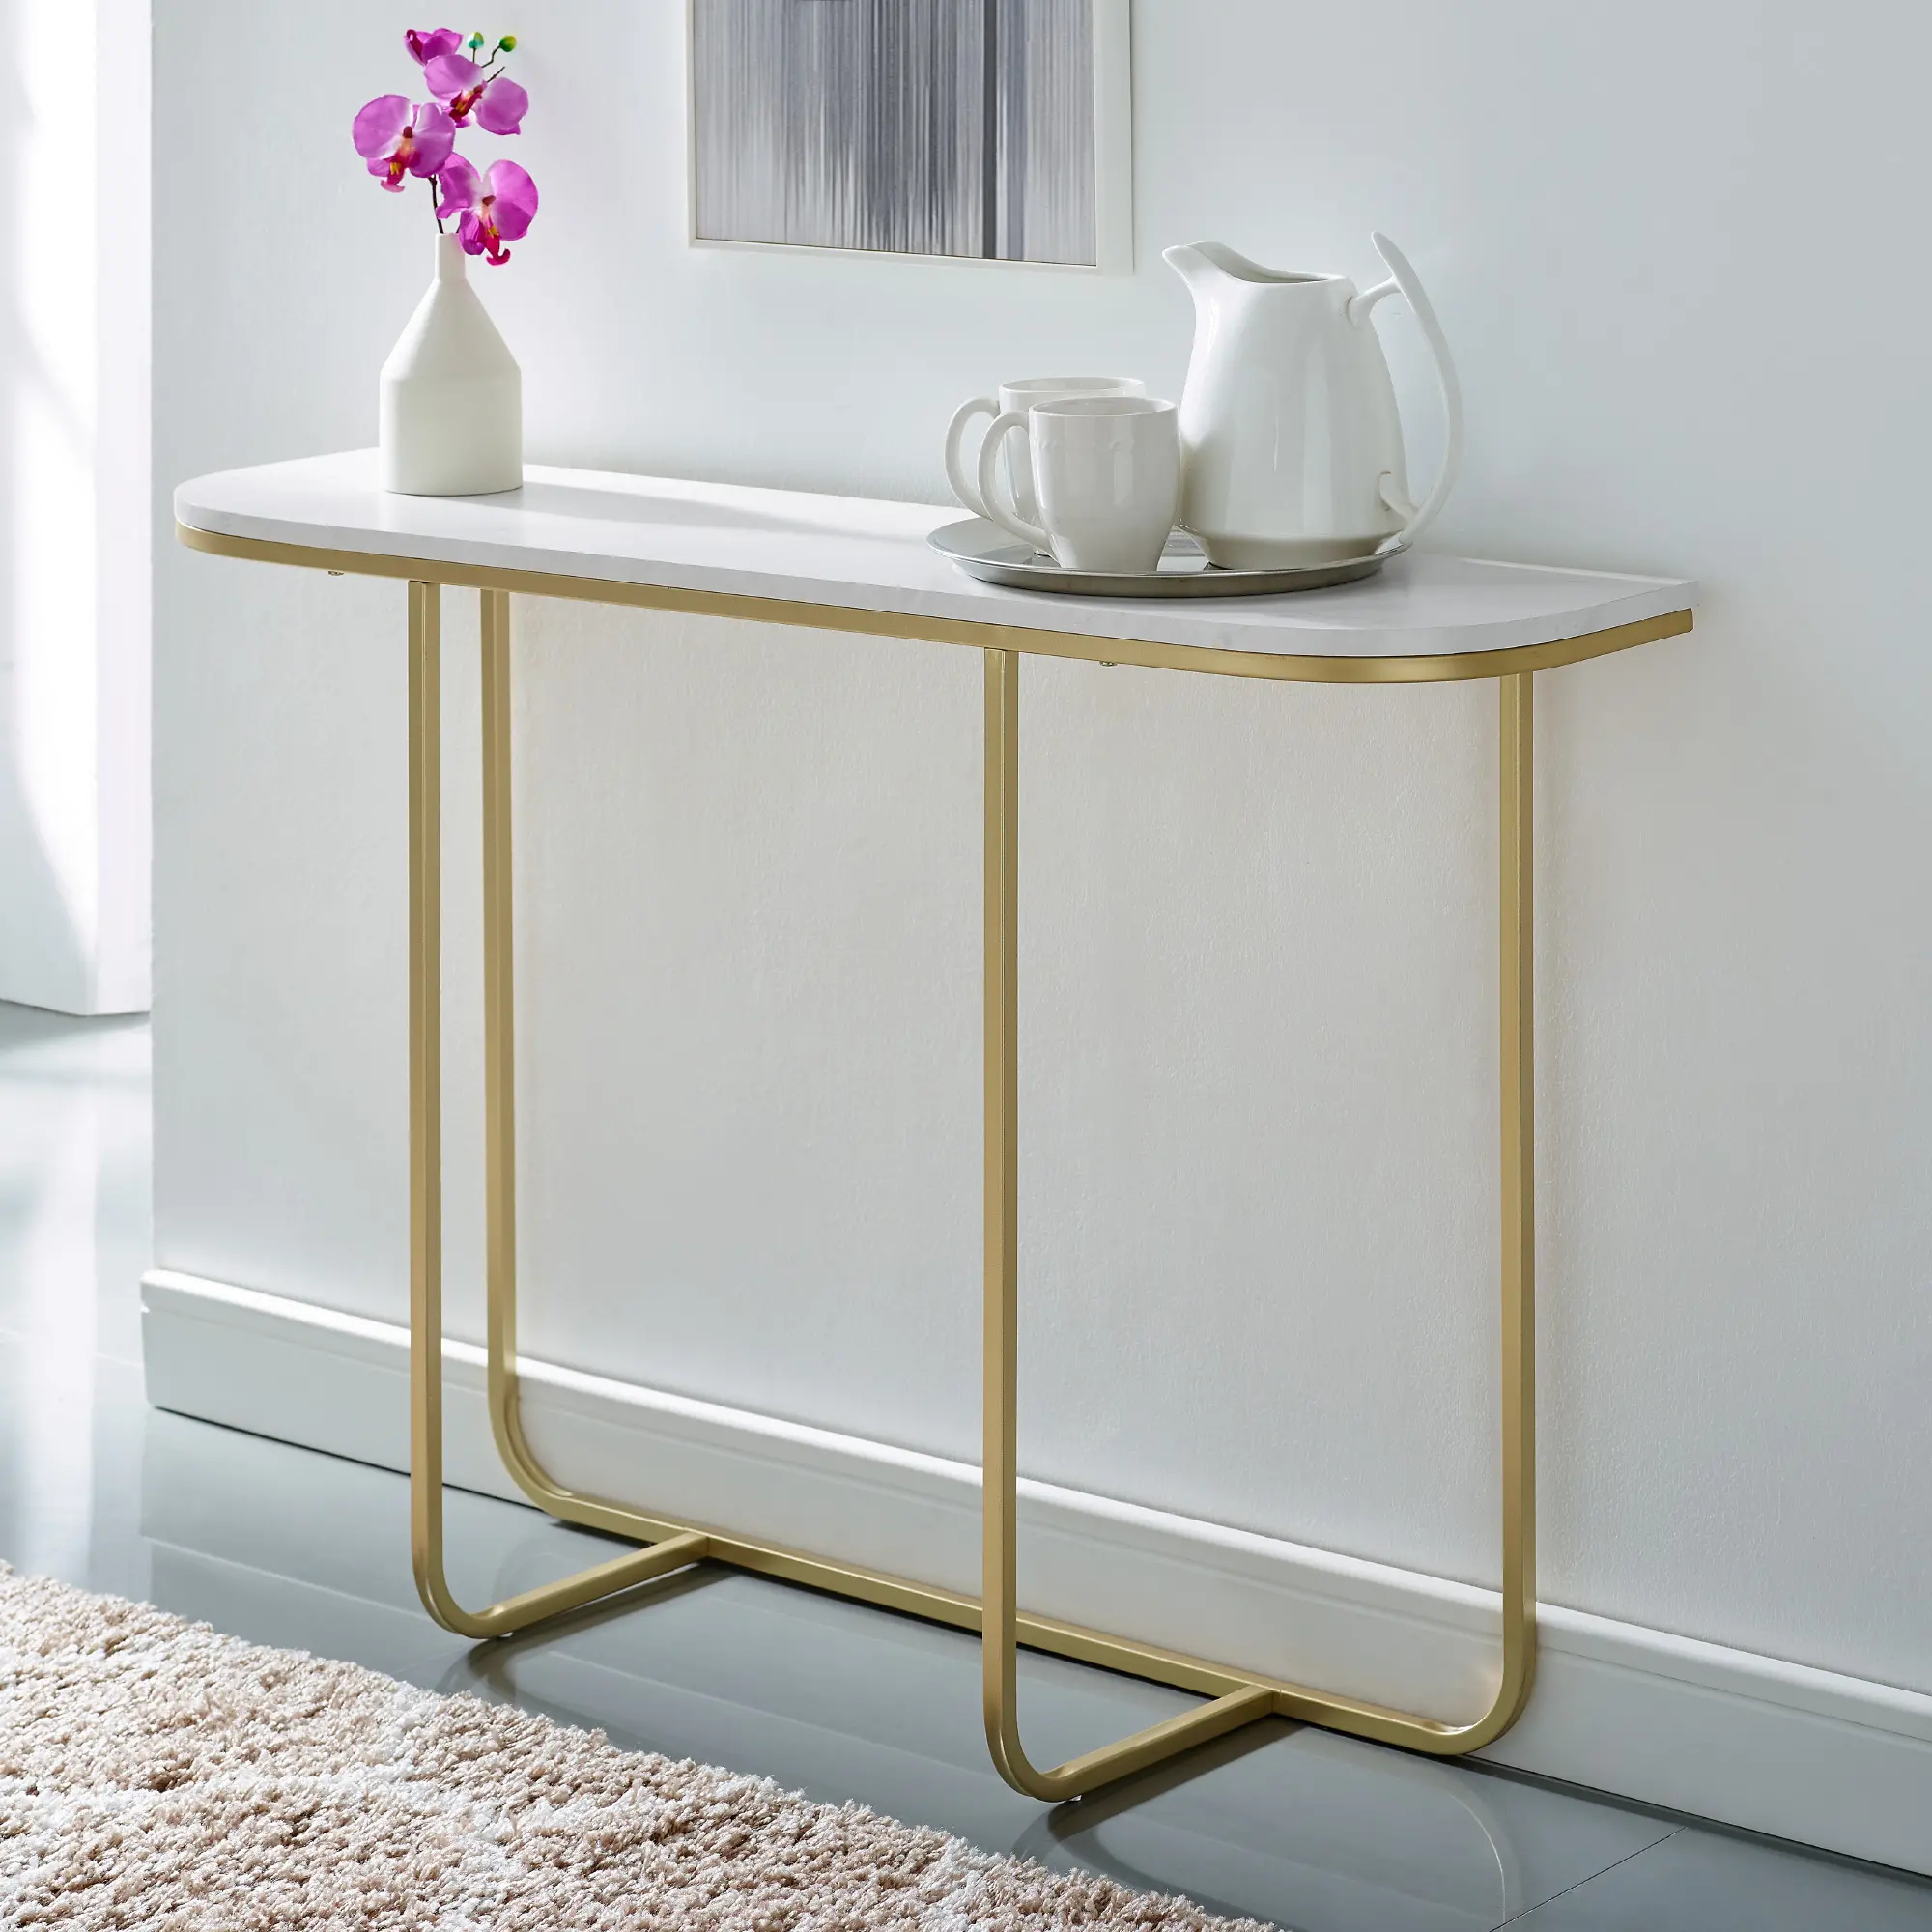 Photos - Coffee Table Walker Edison Marble and Gold Glam Entry Table - Harley -  AF 